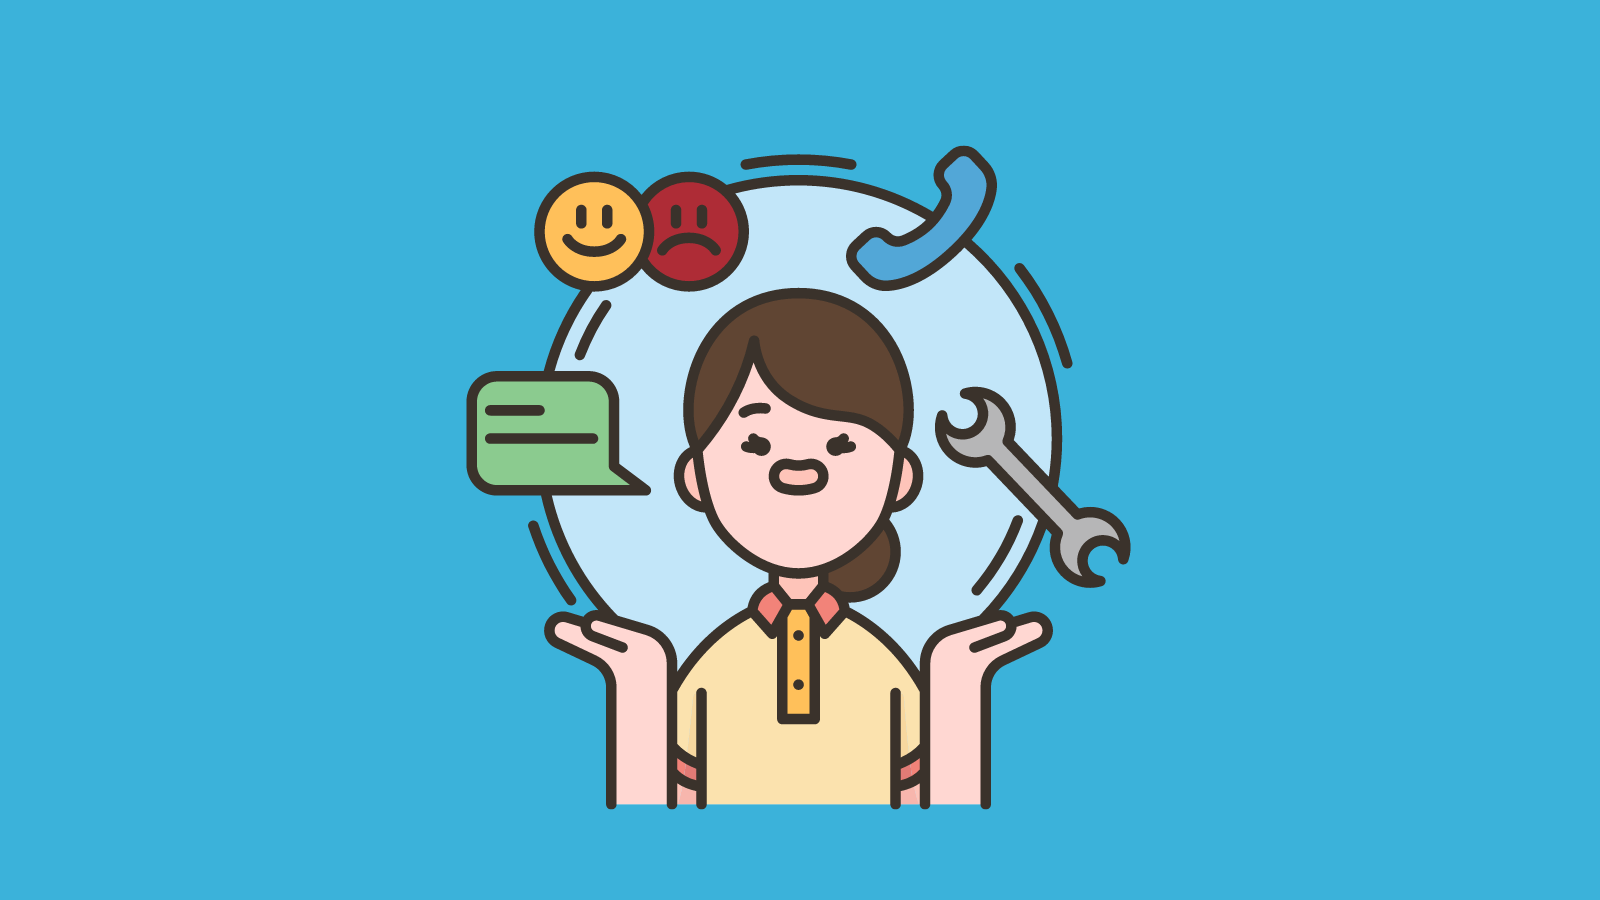 A person with icons of a smiley face, a sad face, a speech bubble, and phone, and a wrench around their head